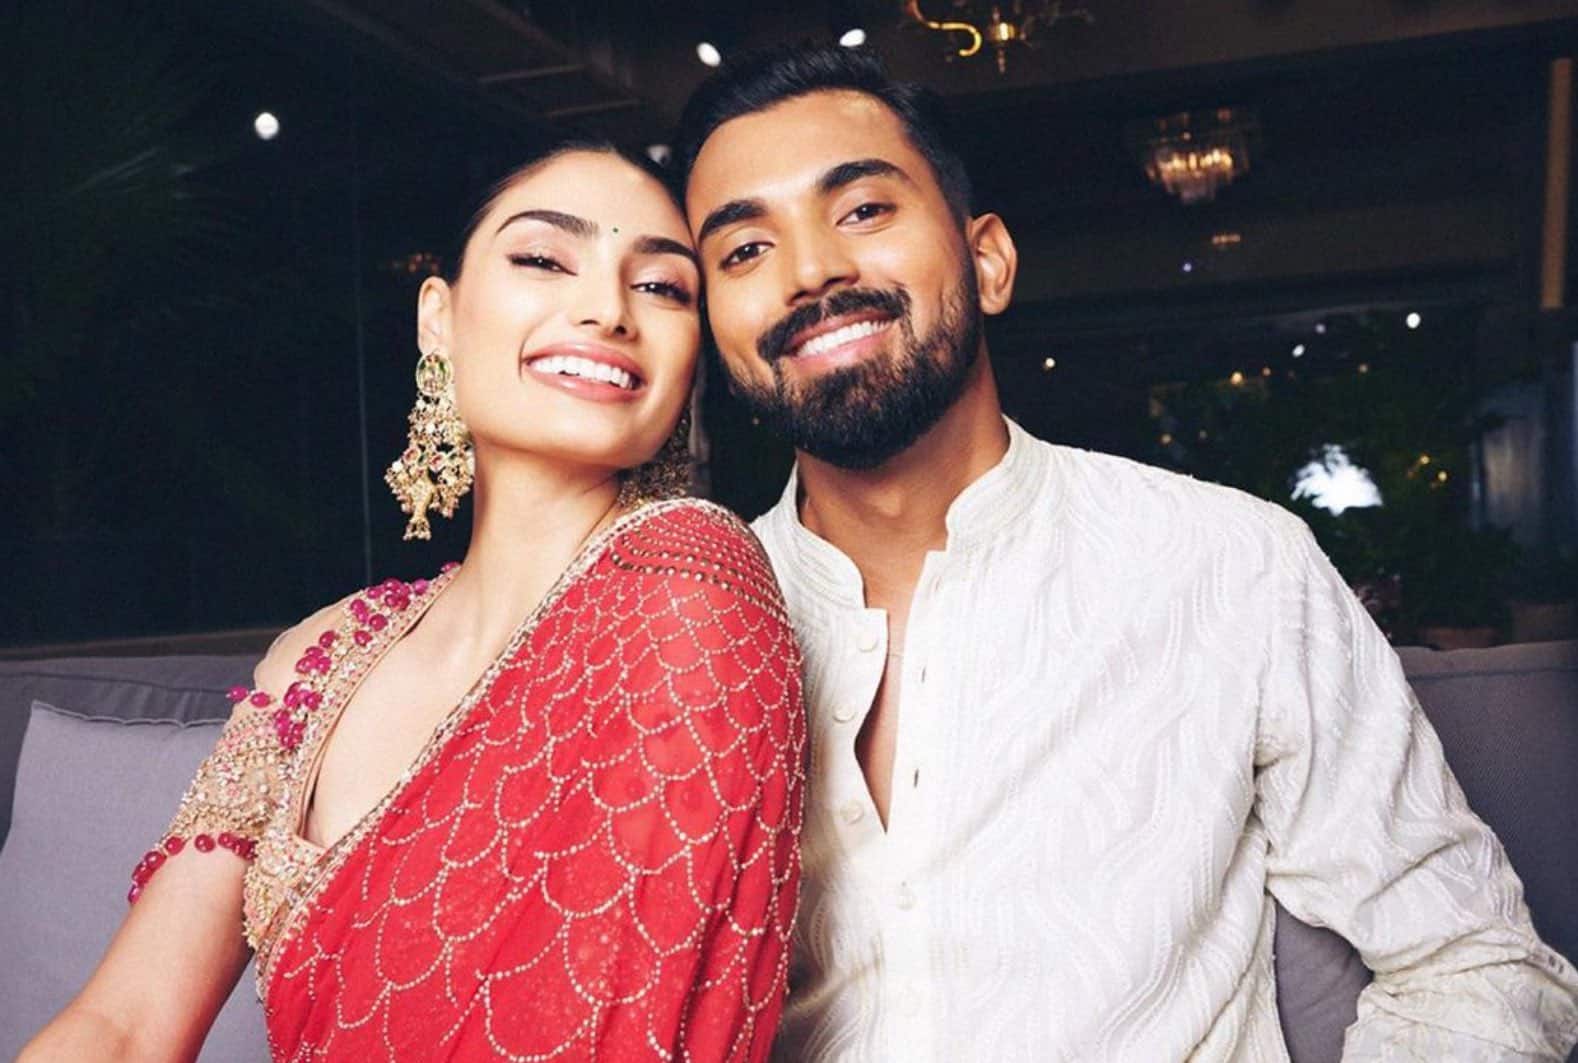 KL Rahul and Athiya Shetty have been married for over a year (Twitter)
